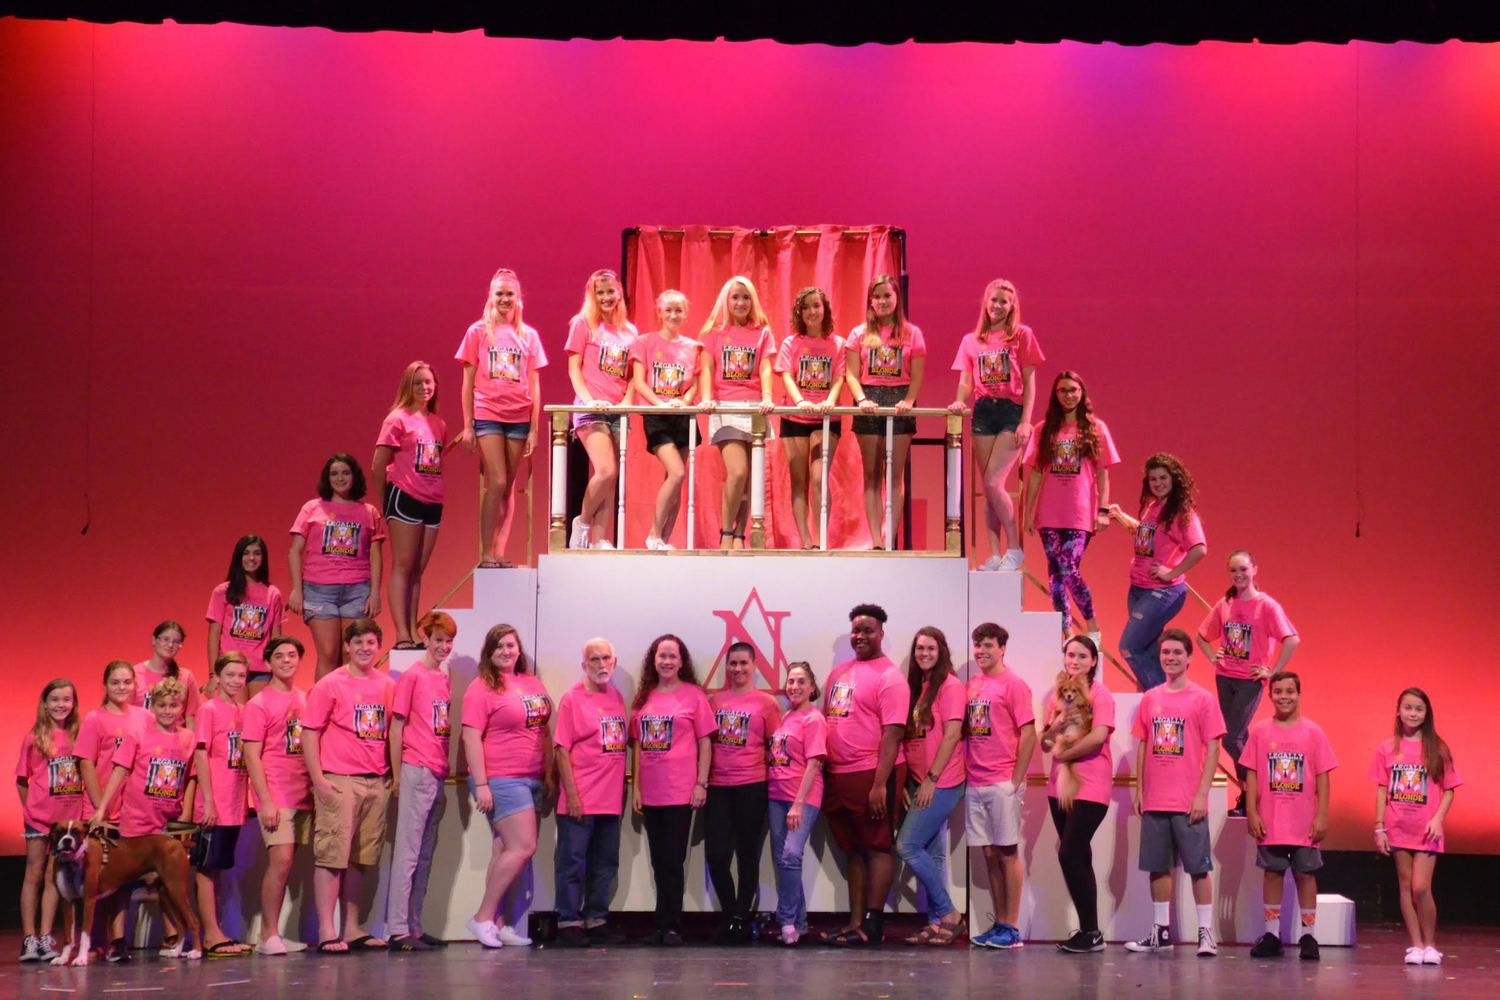 The cast and production team of Legally Blonde